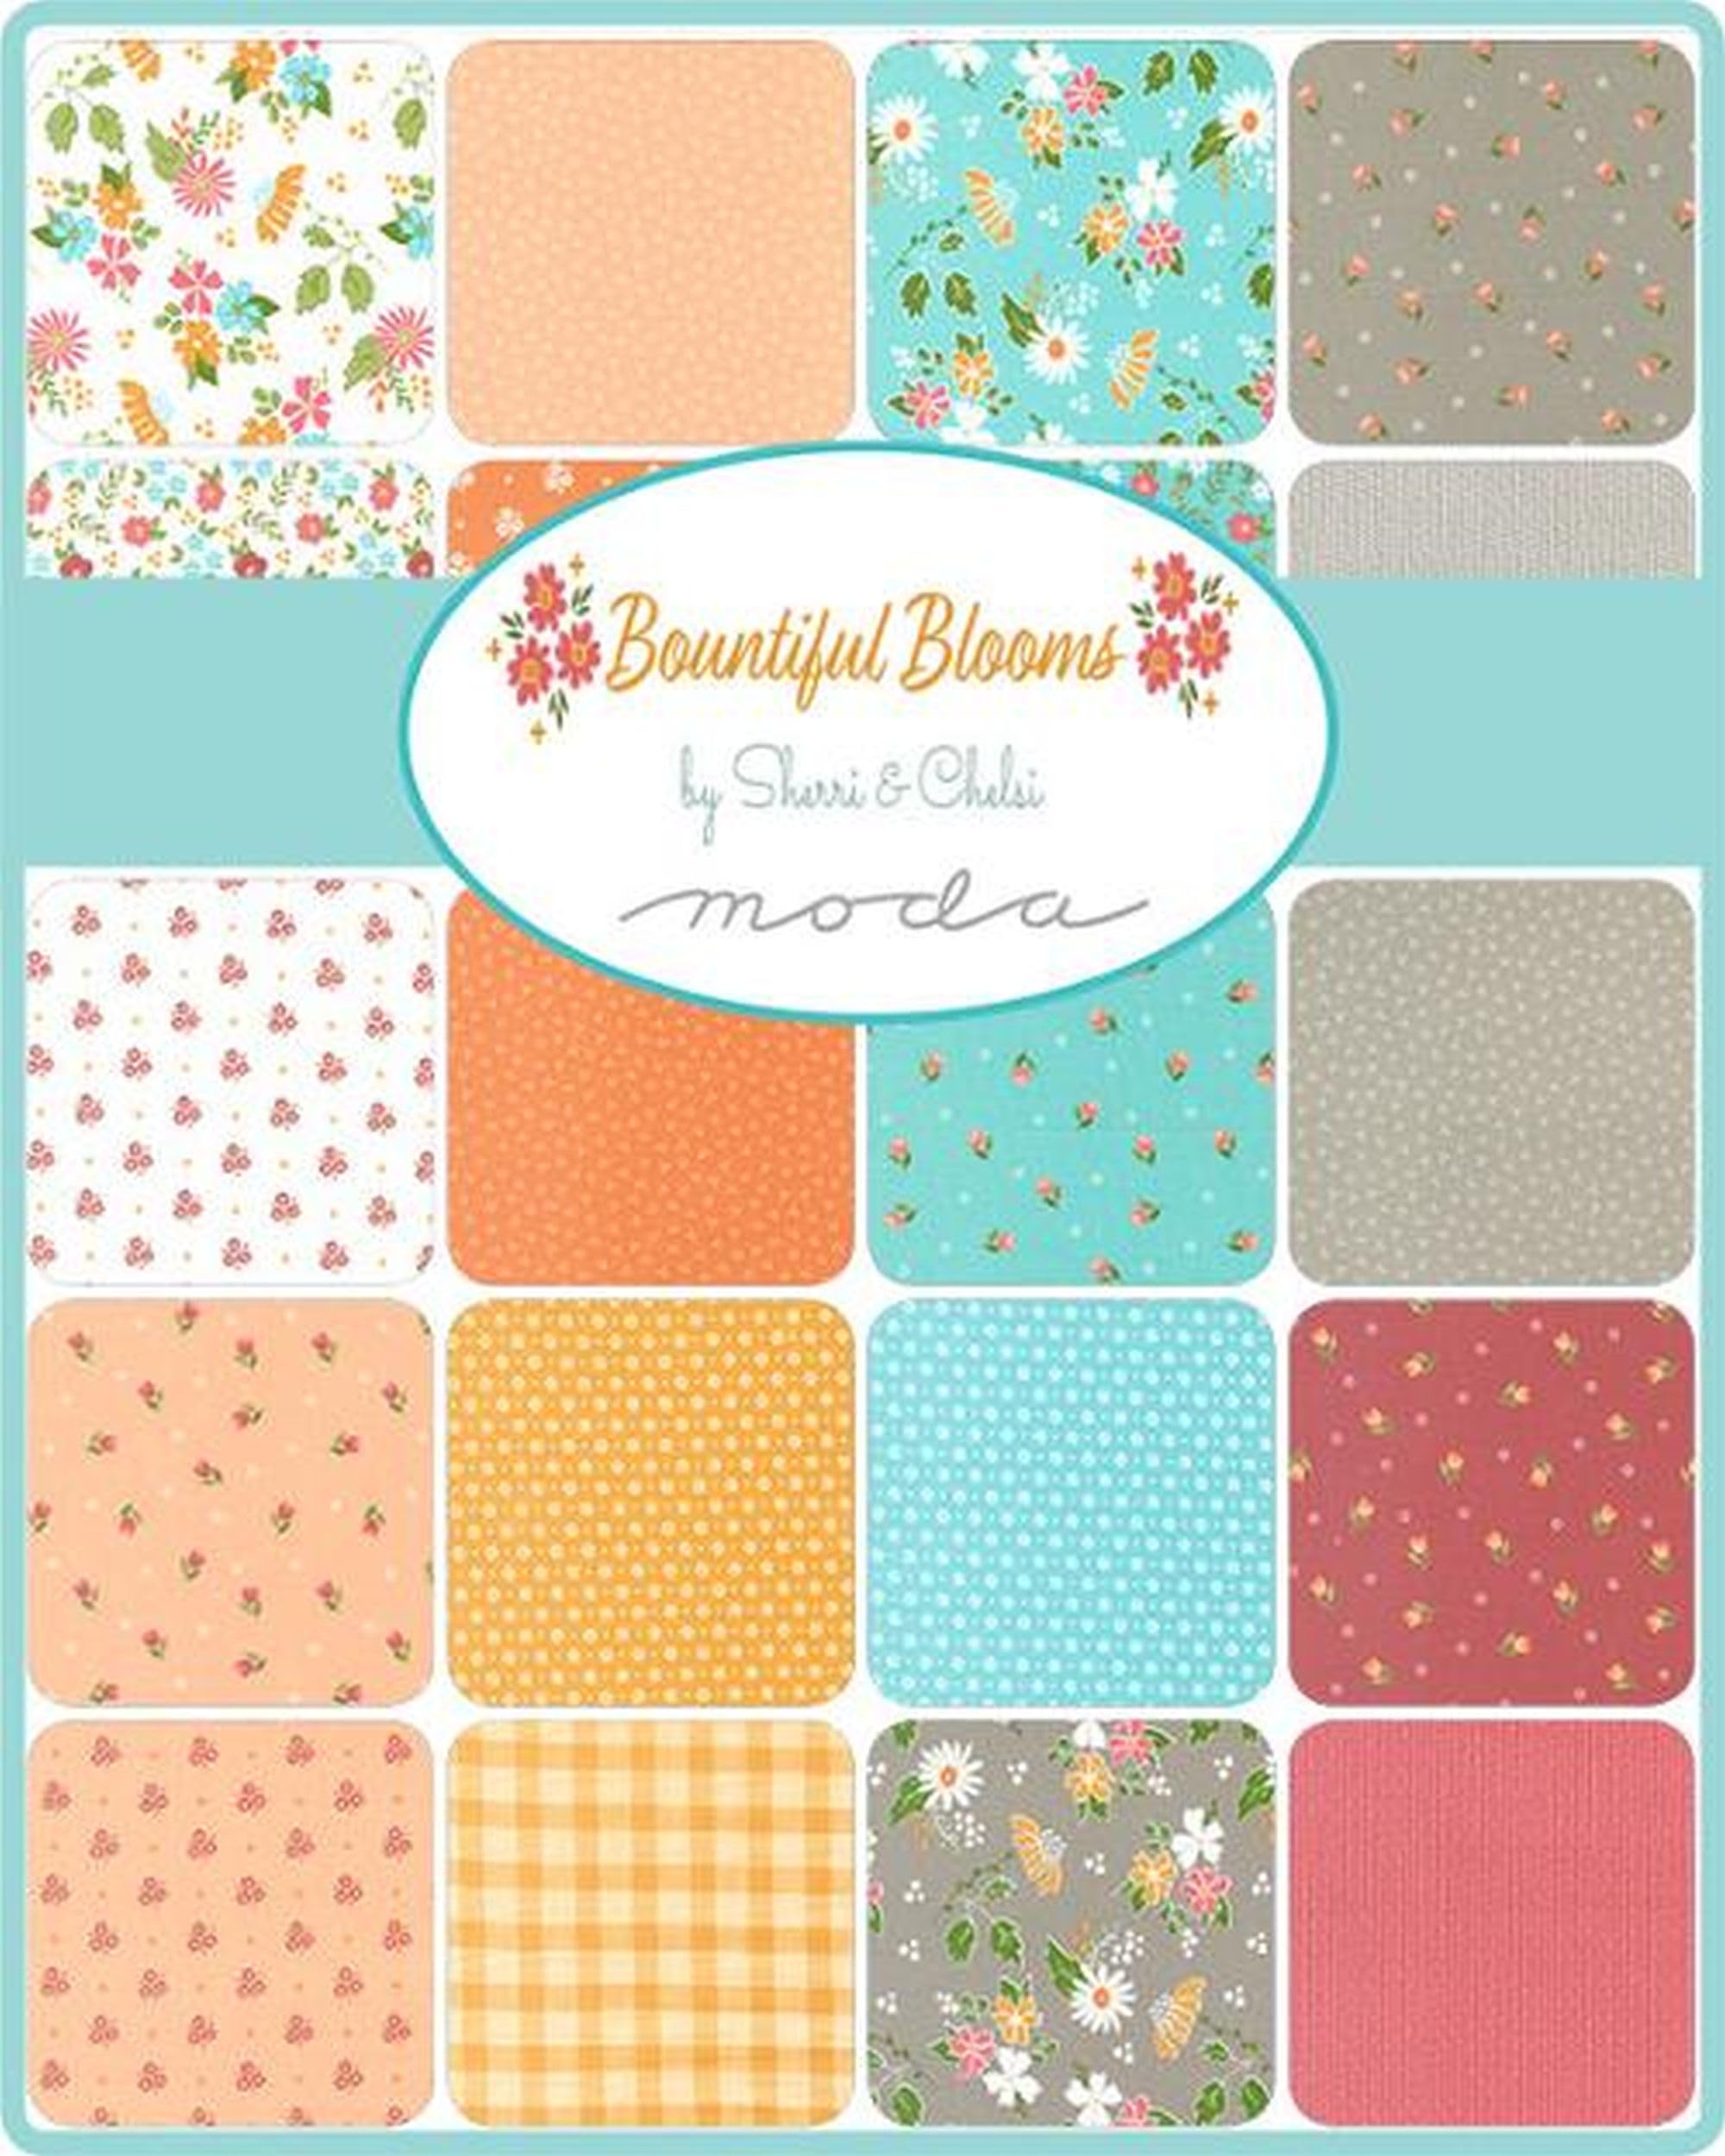 Bountiful Blooms Charm Pack 37660PP by Sherri & Chelsi from Moda by The Pack